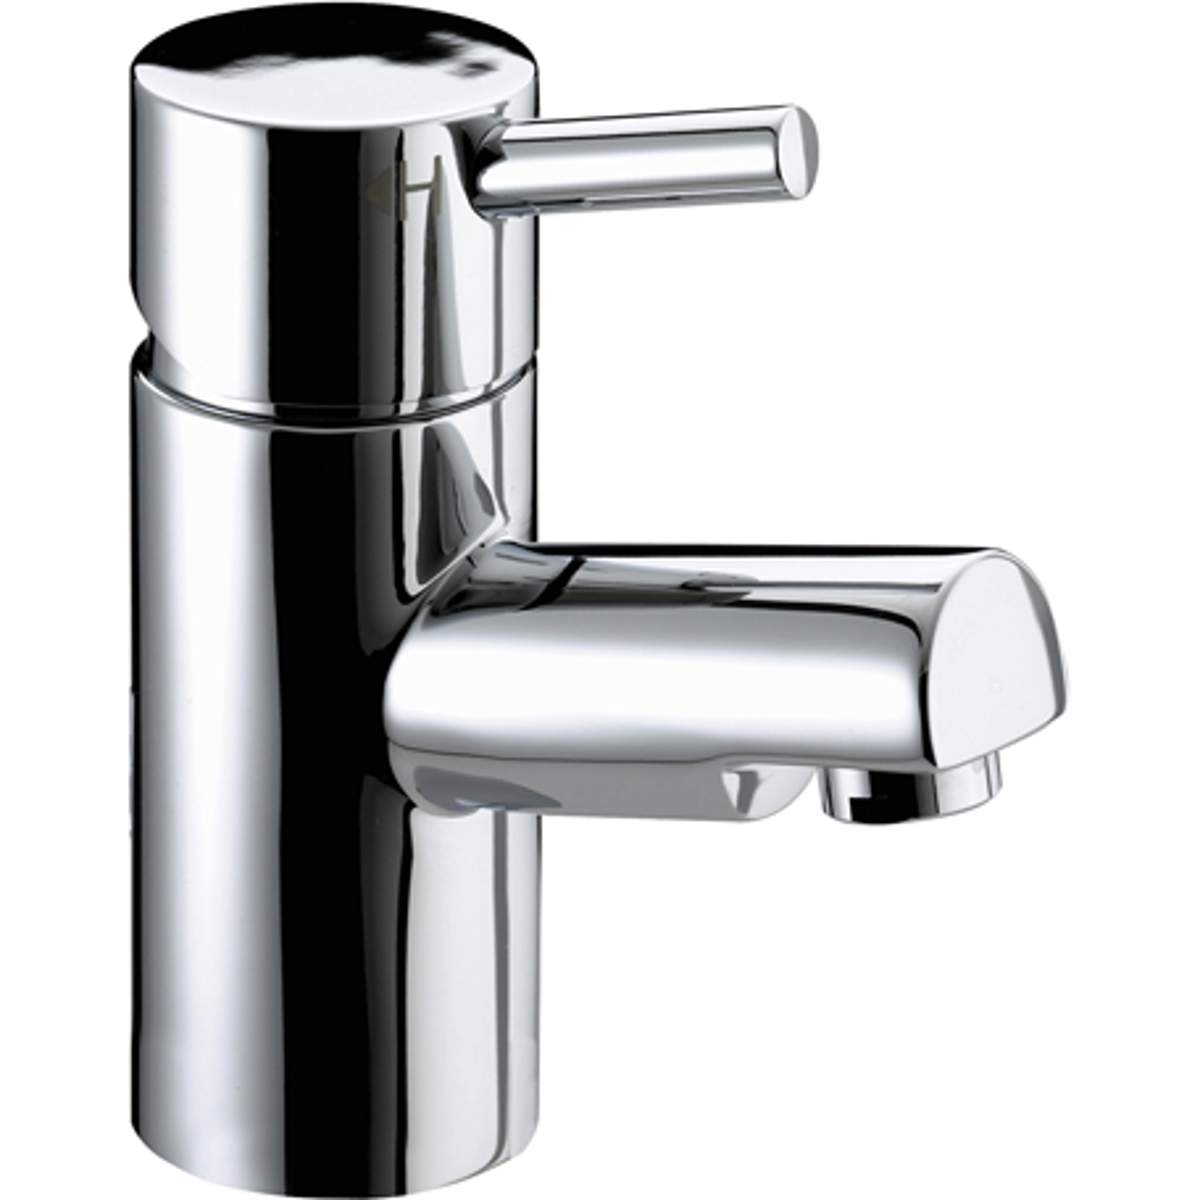 Bristan Prism Basin Mixer without Waste (PM BASNW C)